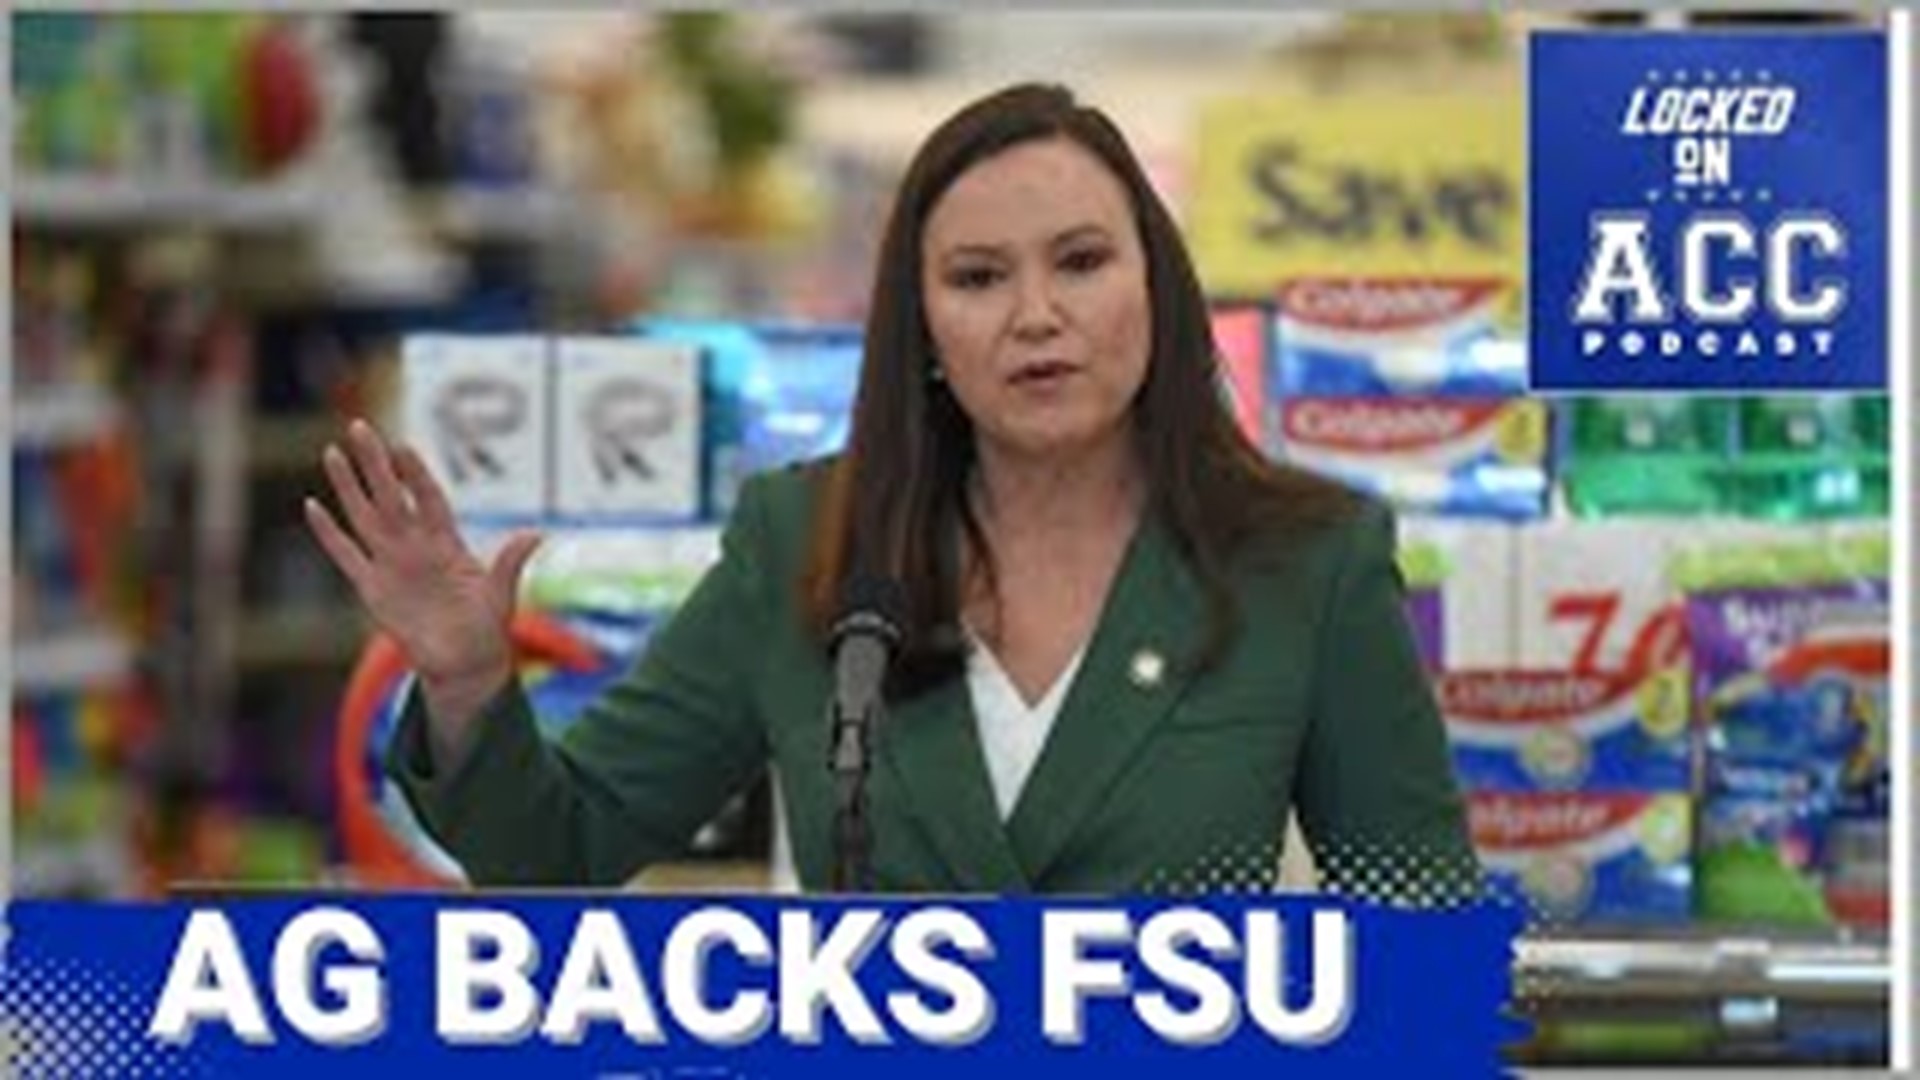 Ashley Moody, the Attorney General in Florida, is considering backing up Florida State University in their fight with the ACC over the Grant of Rights.